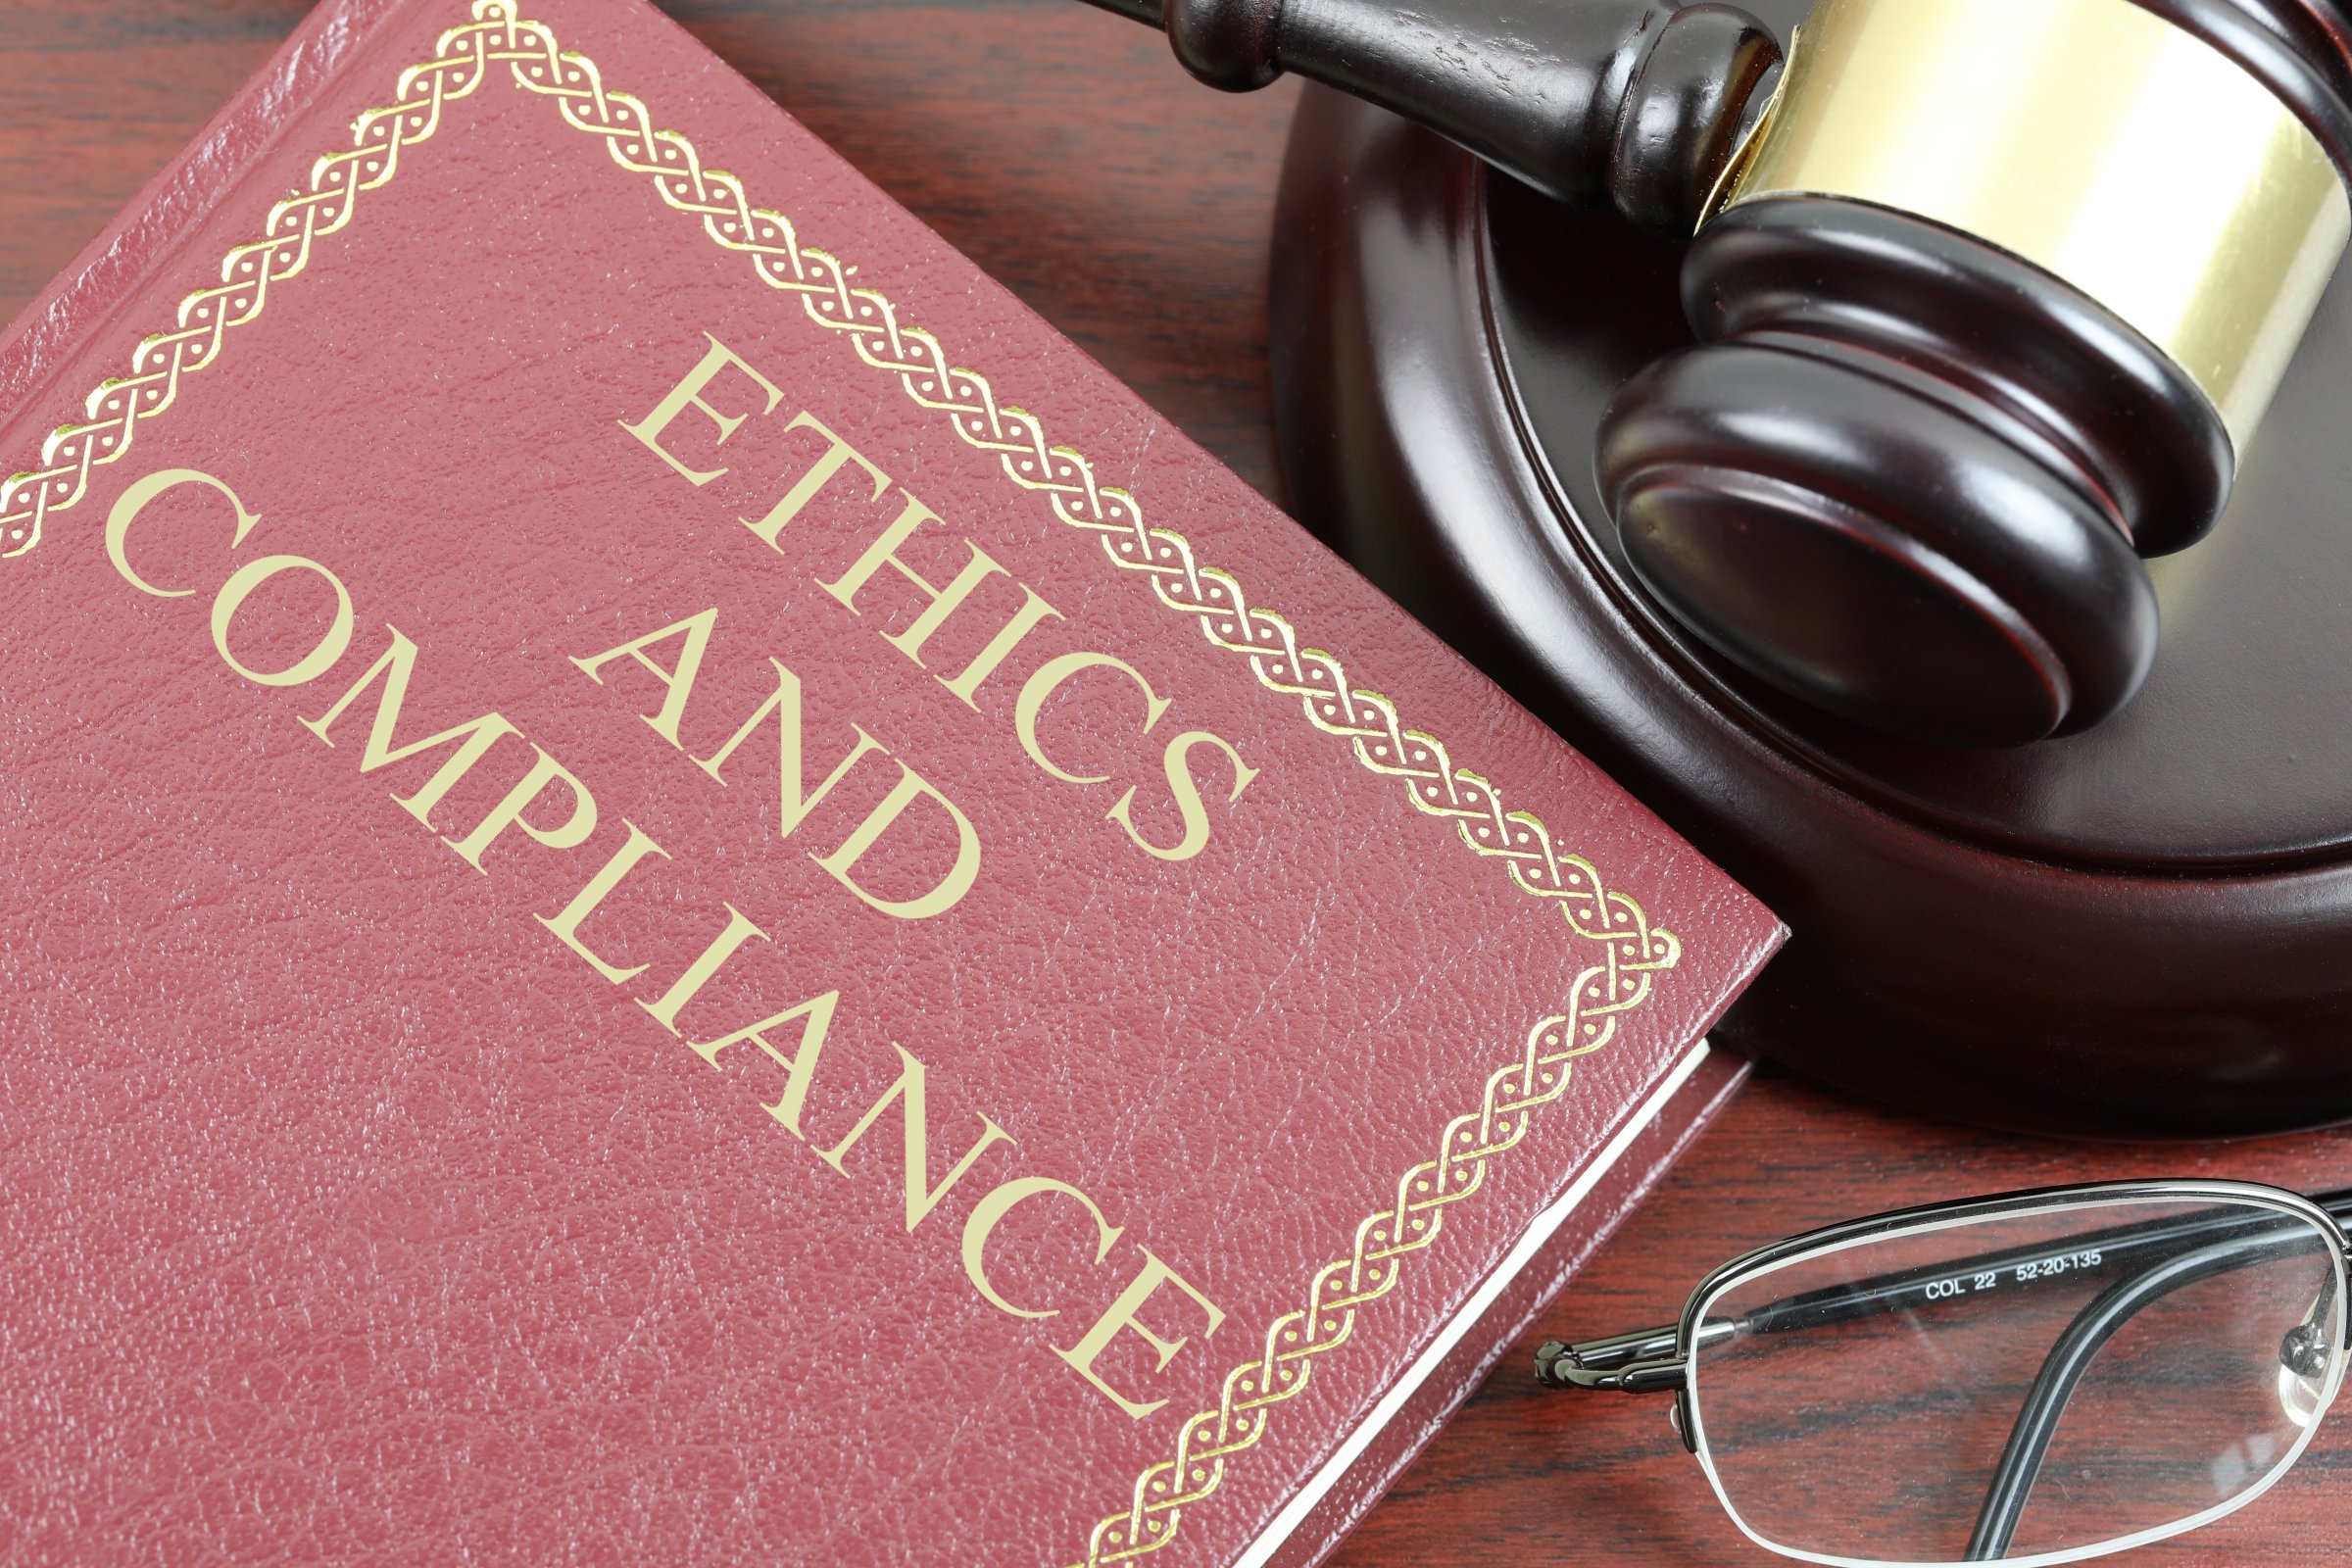 Ethics And Compliance Free of Charge Creative Commons Law book image